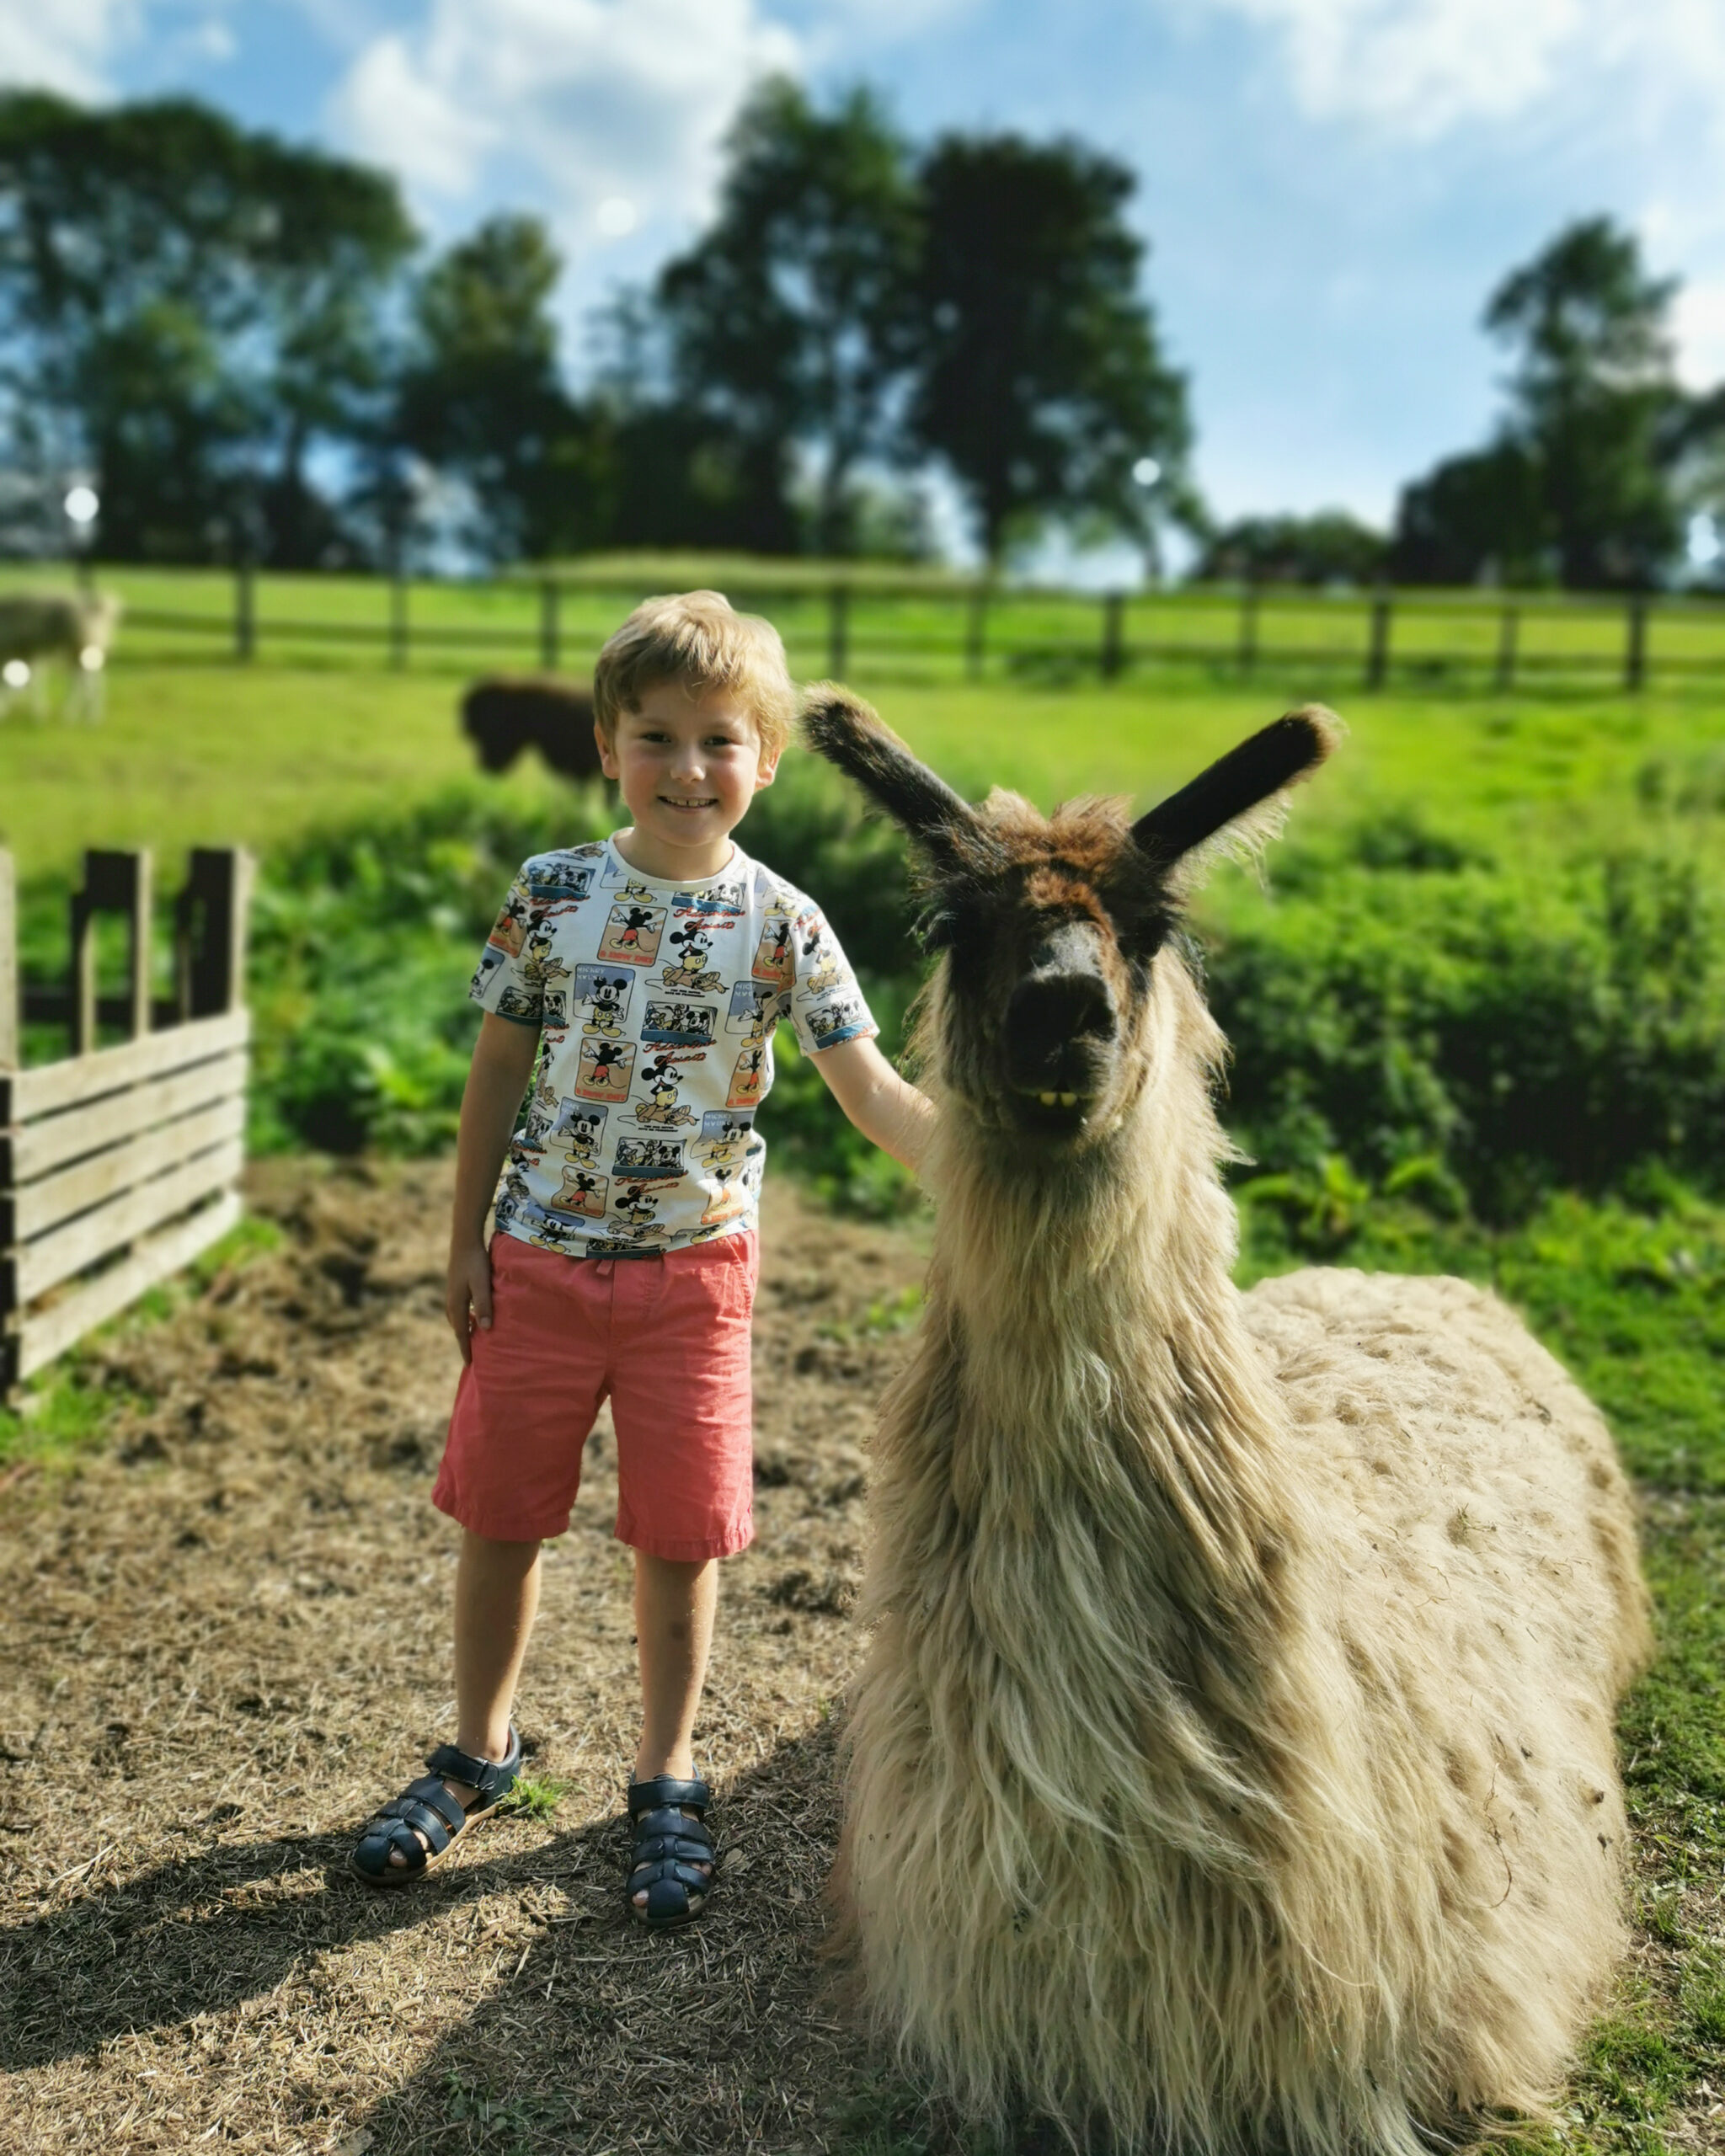 The Merry Harriers, Shepherd's Hut, Glamping, Surrey Staycation, Luxury Glamping, Family Staycation, Surrey, Godalming, The Frenchie Mummy, Press Trip, Family-Friendly, Staycation, Llama Trek, Llamas, Hot Tub, Country Adventures